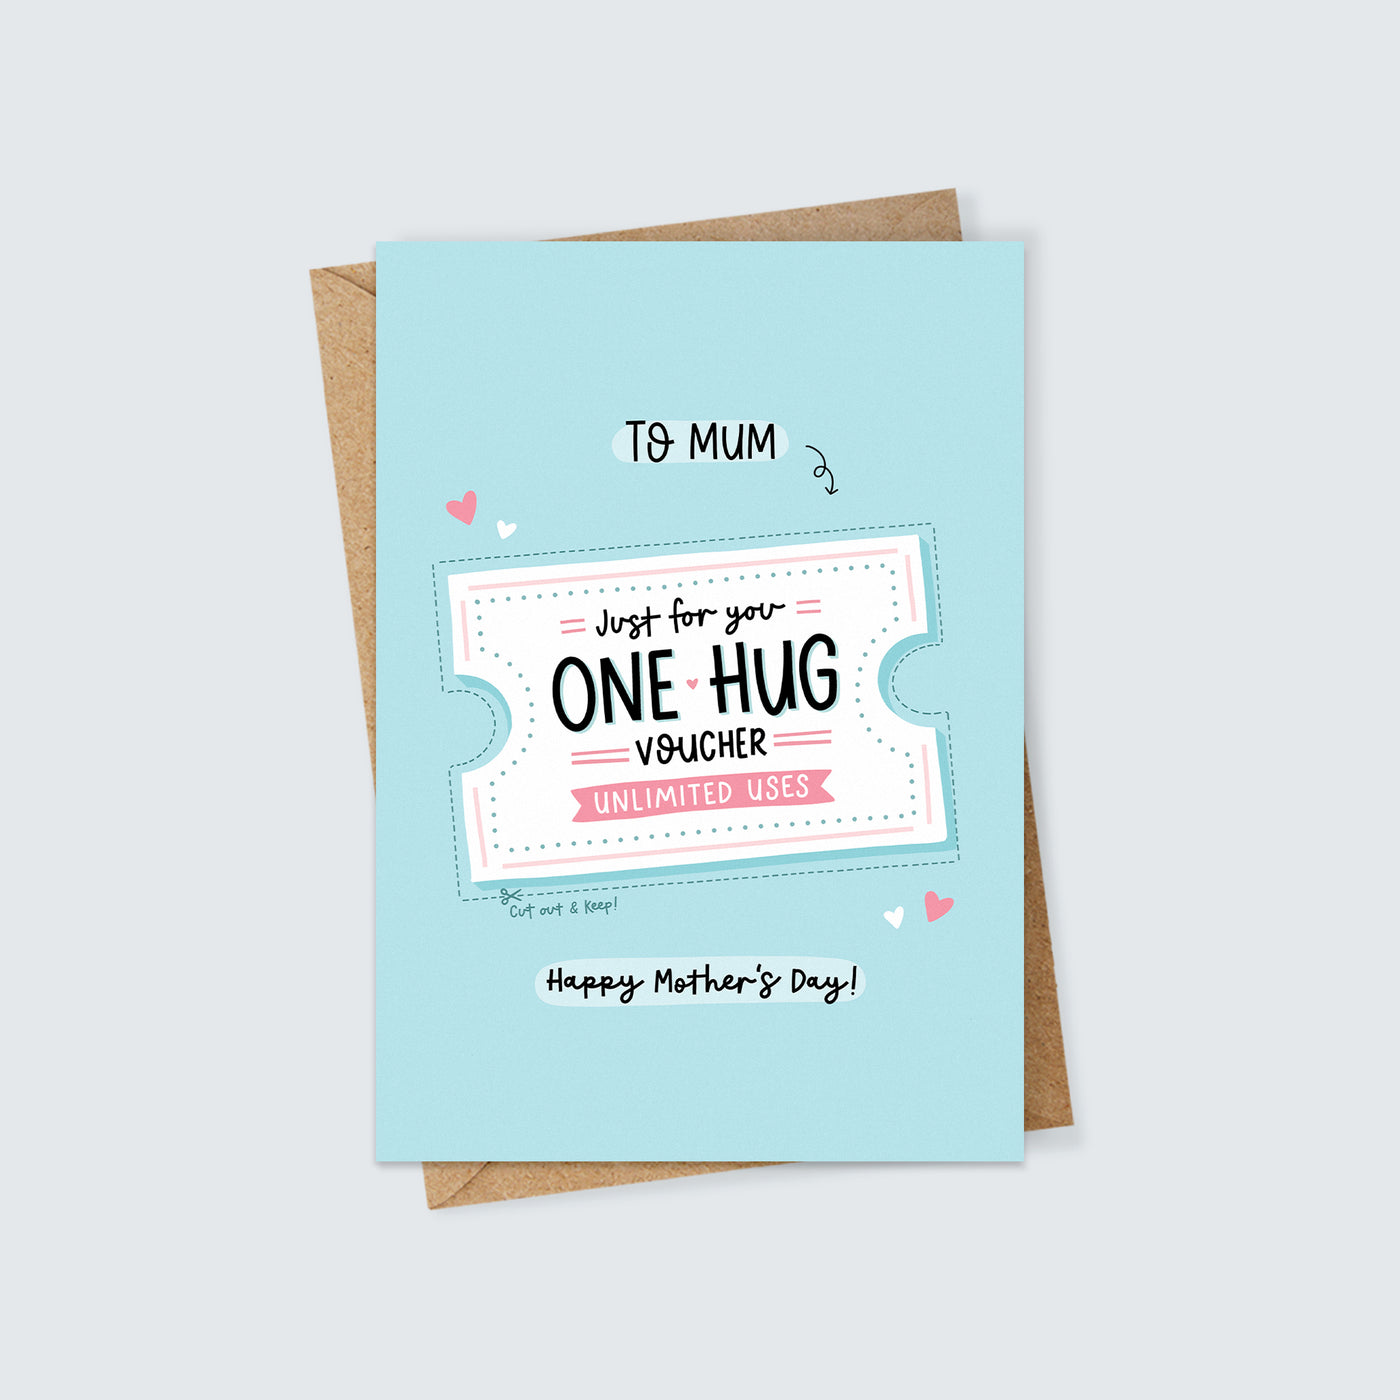 One Hug Voucher for Mum Mother's Day Card